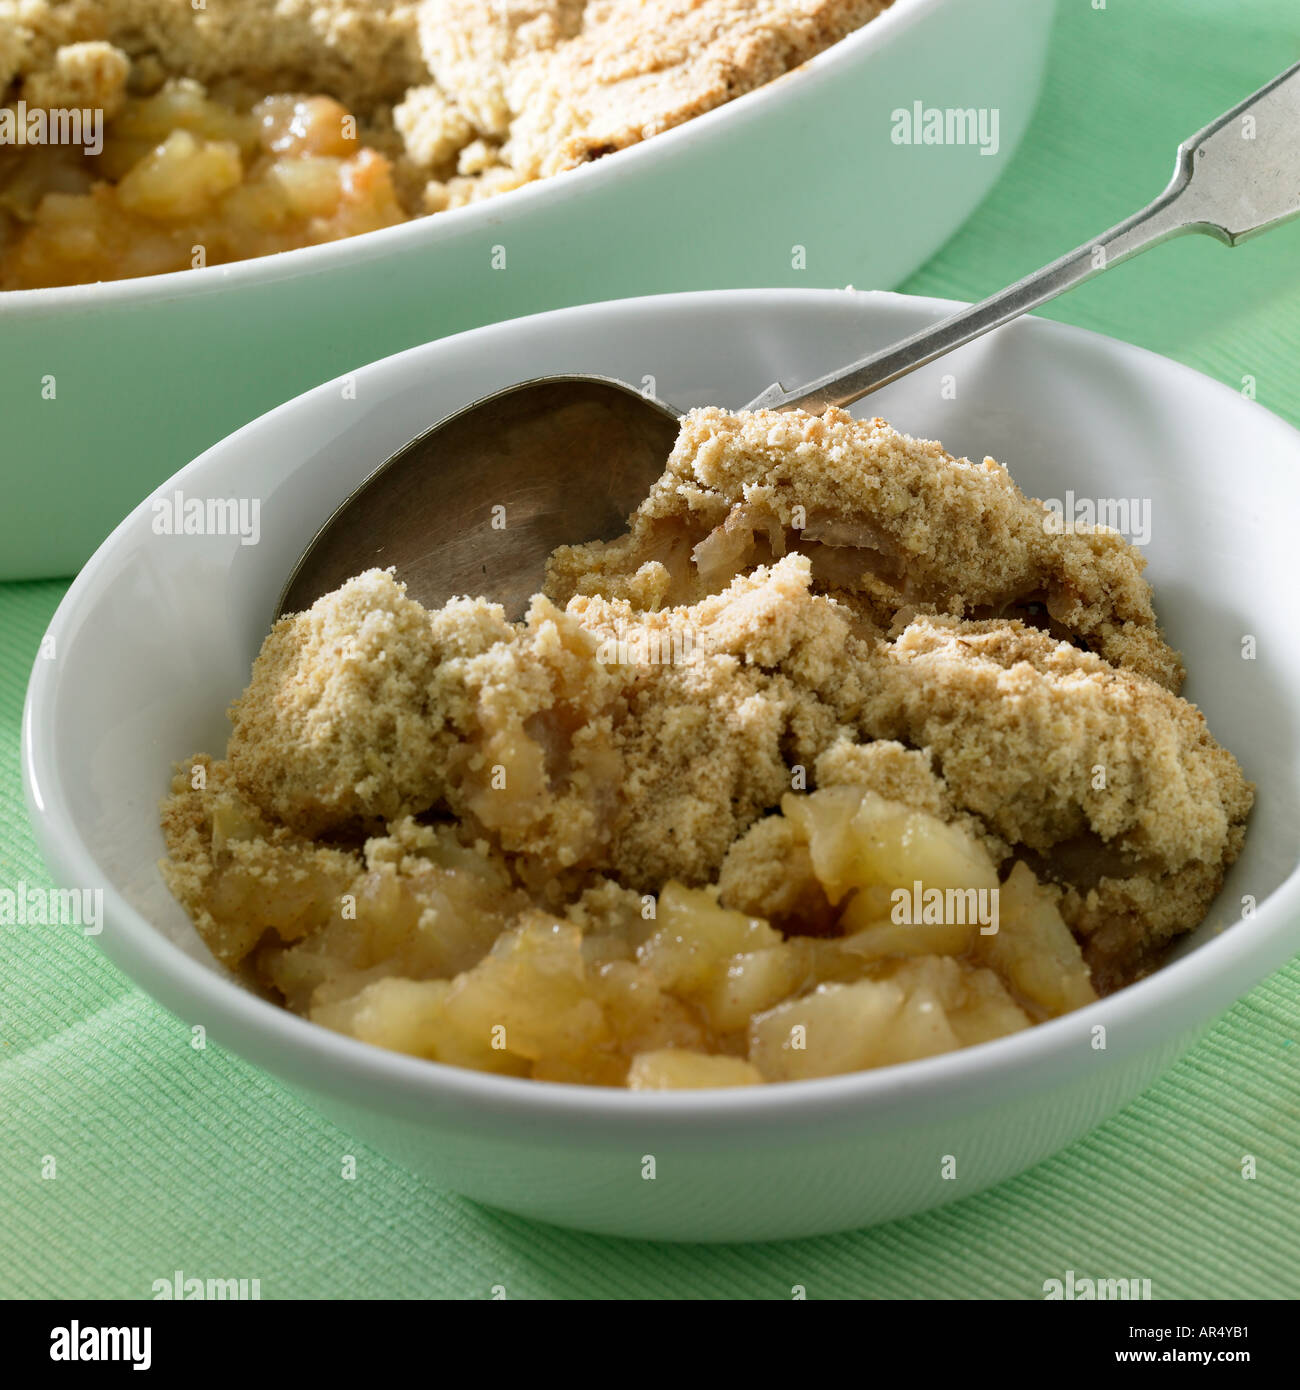 portion of apple crumble with dish in b/g Stock Photo